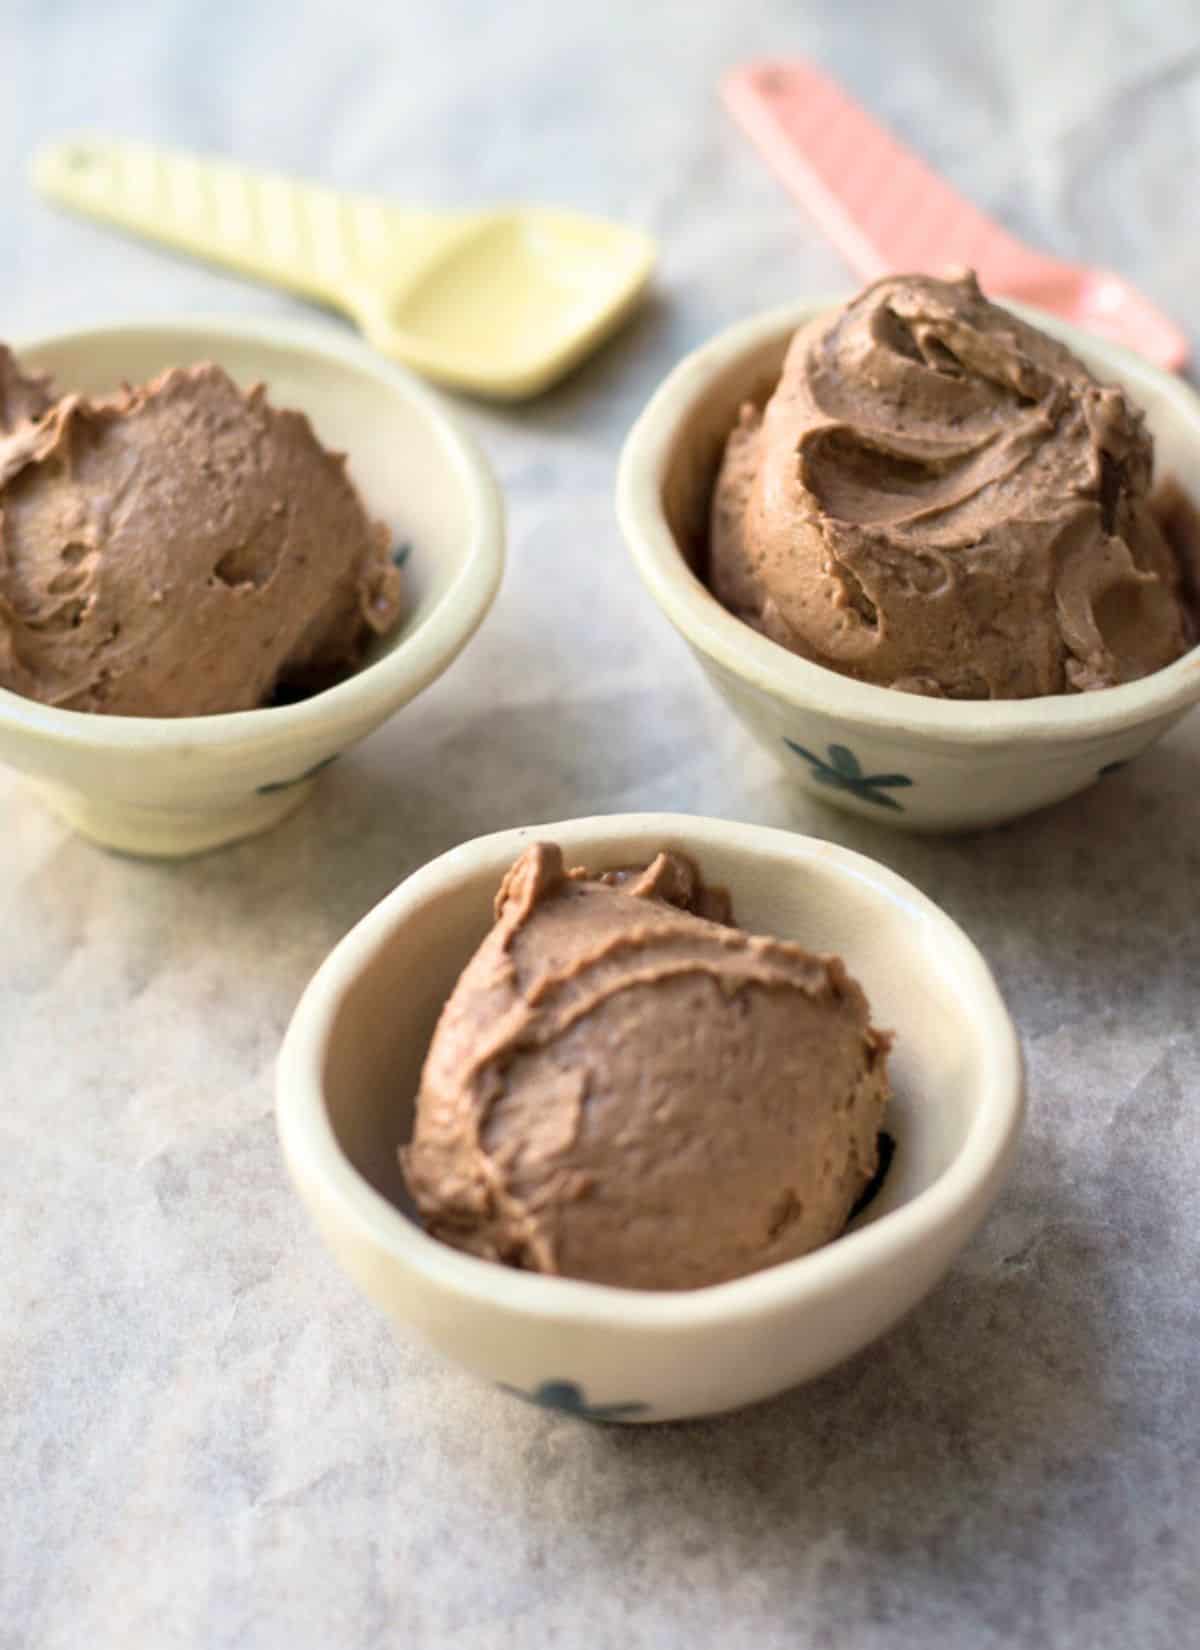 Nutella Ice Cream in 3 small bowls on a grey background.